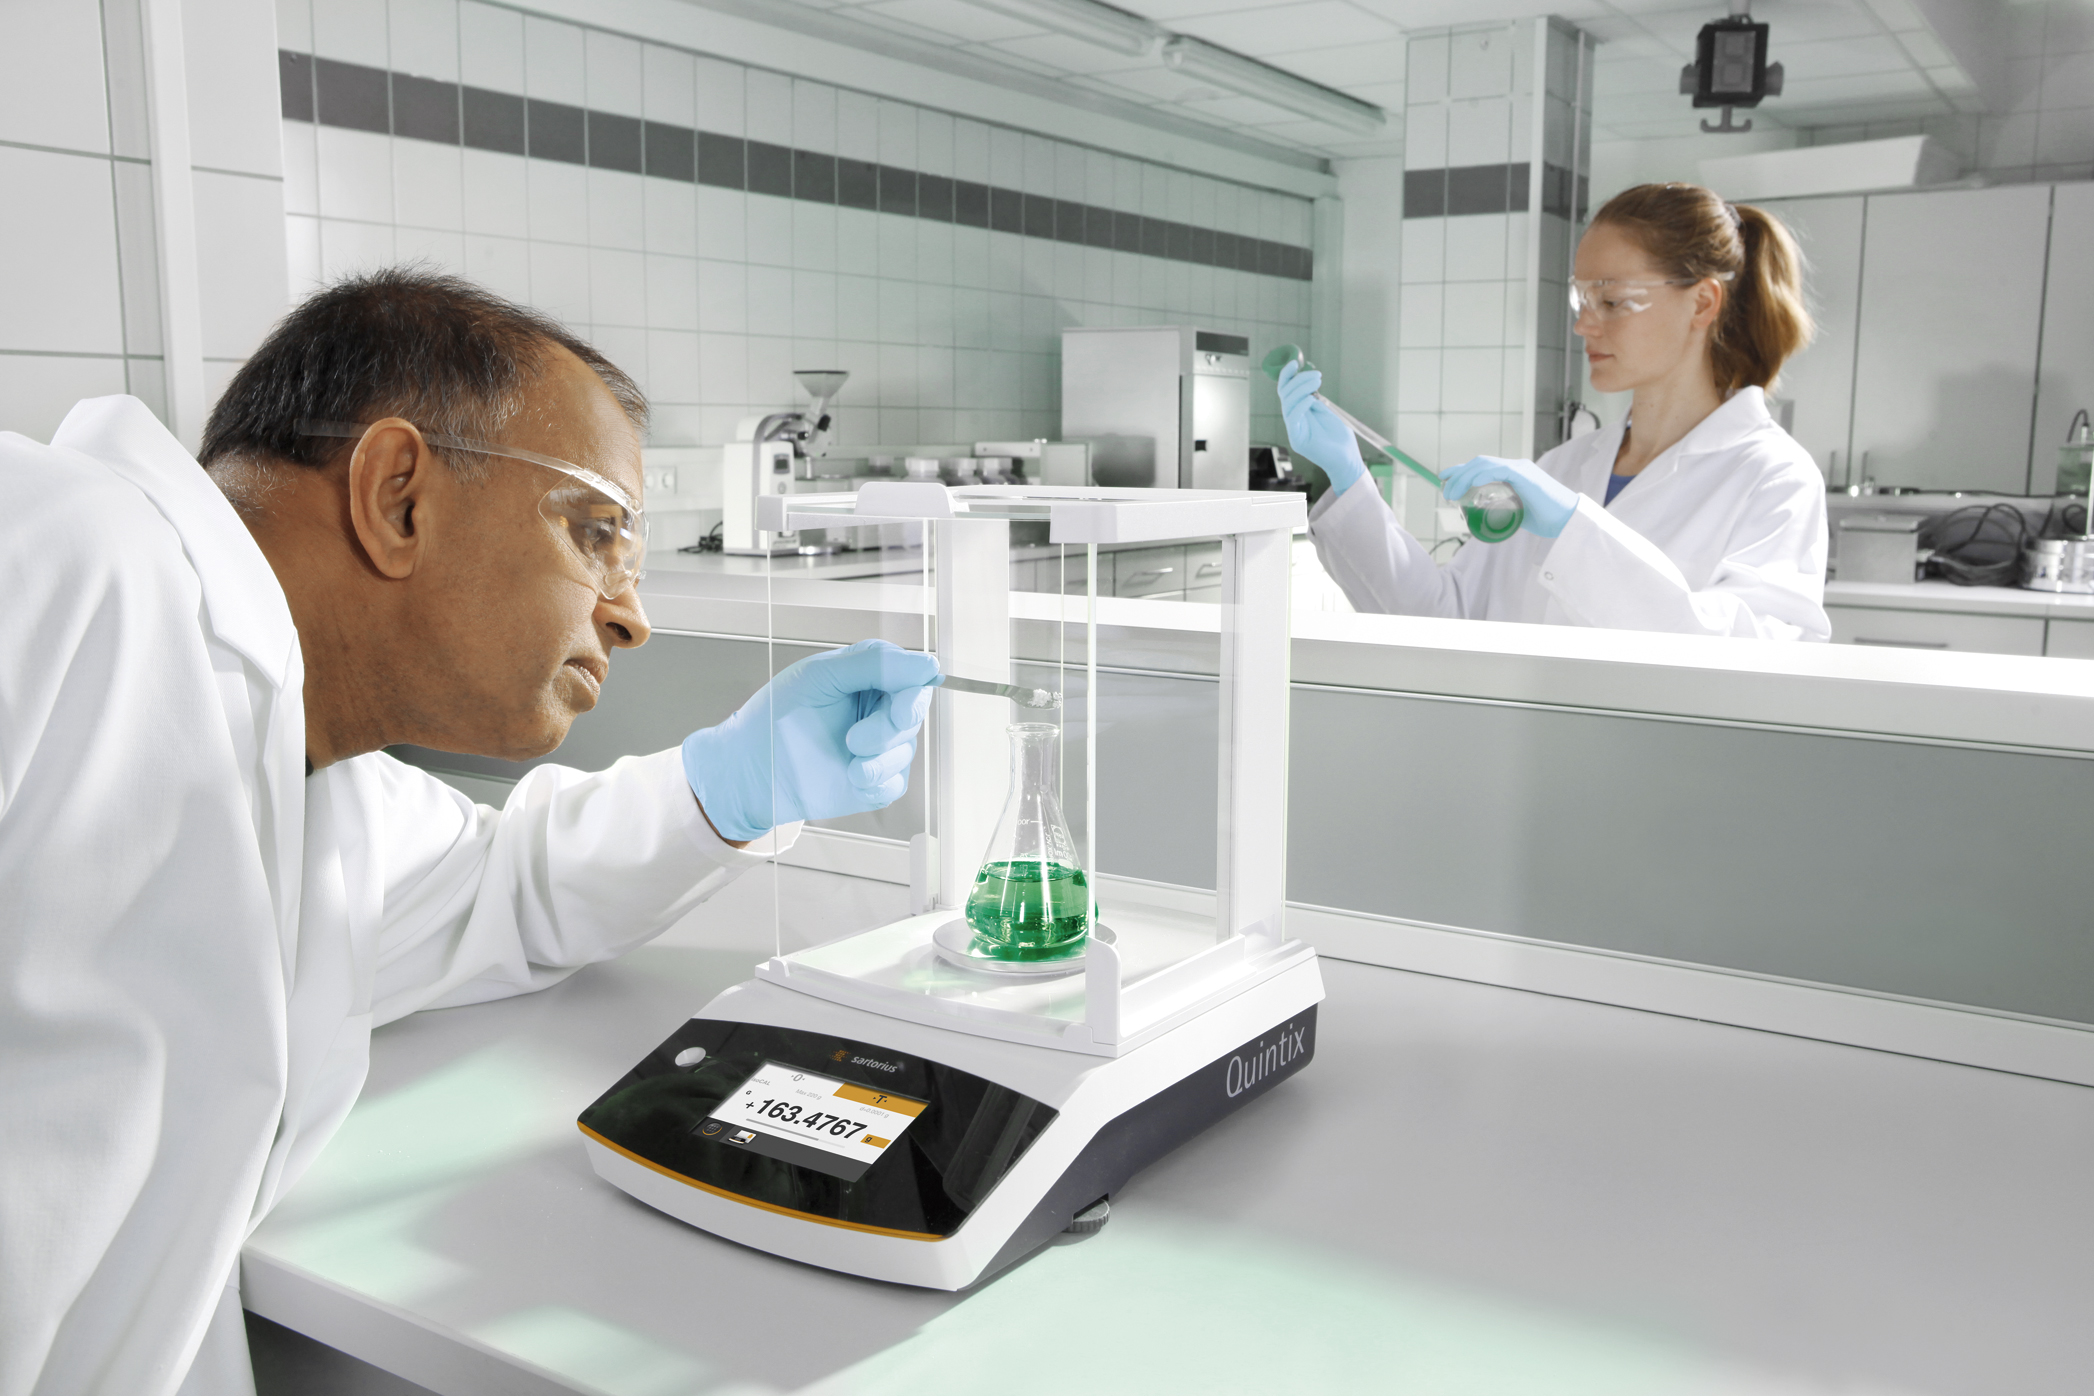 The Sartorius Quintix can guarantee the highest metrological quality and reliability of its weighing results